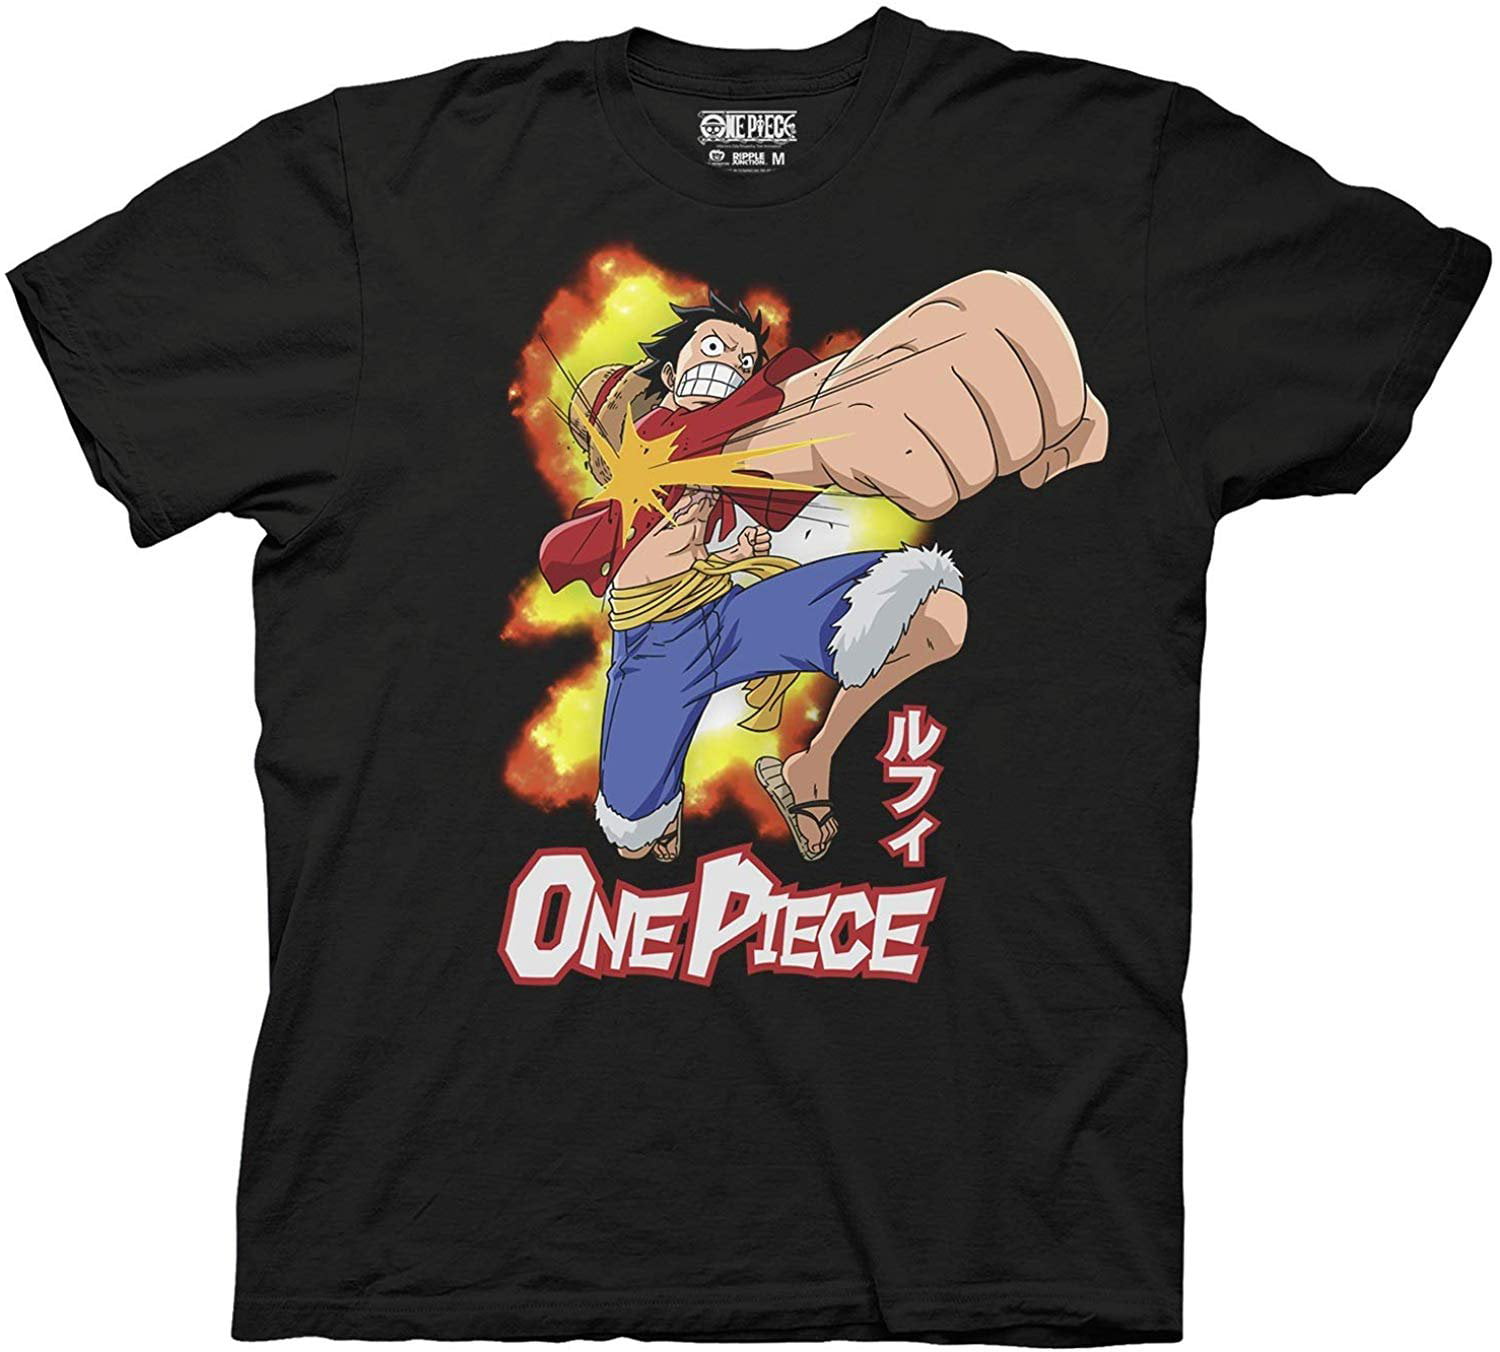 Ripple Junction - Ripple Junction Mens One Piece Anime T-Shirt - One